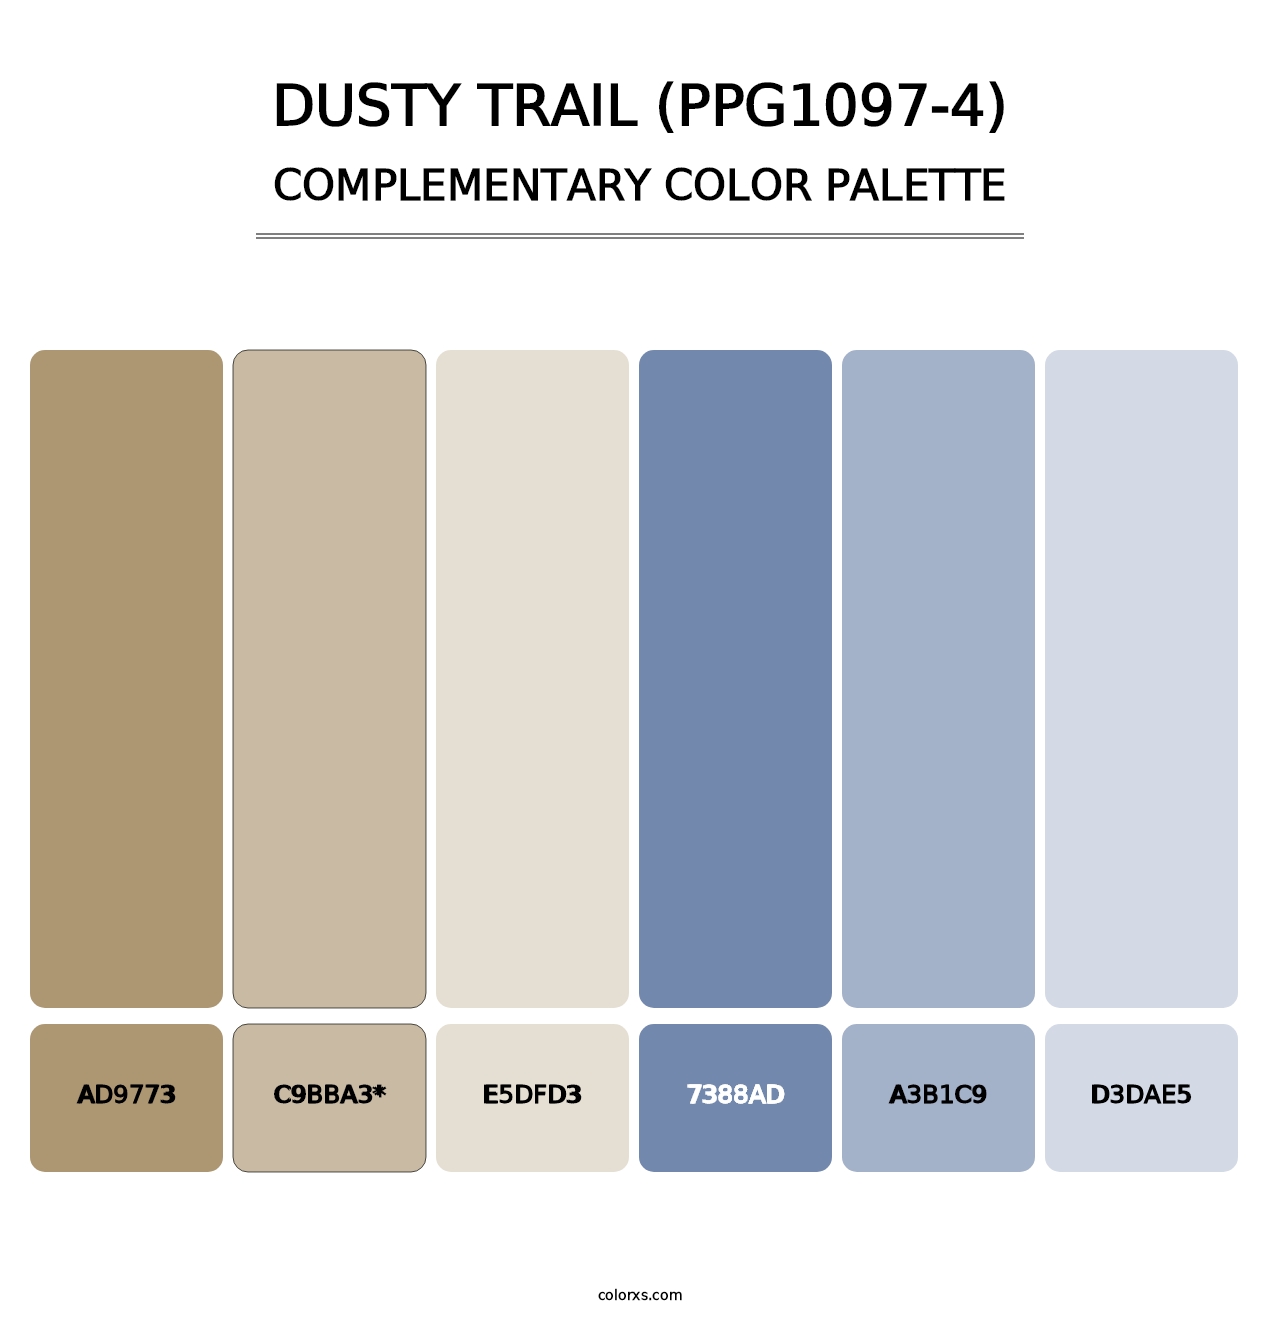 Dusty Trail (PPG1097-4) - Complementary Color Palette